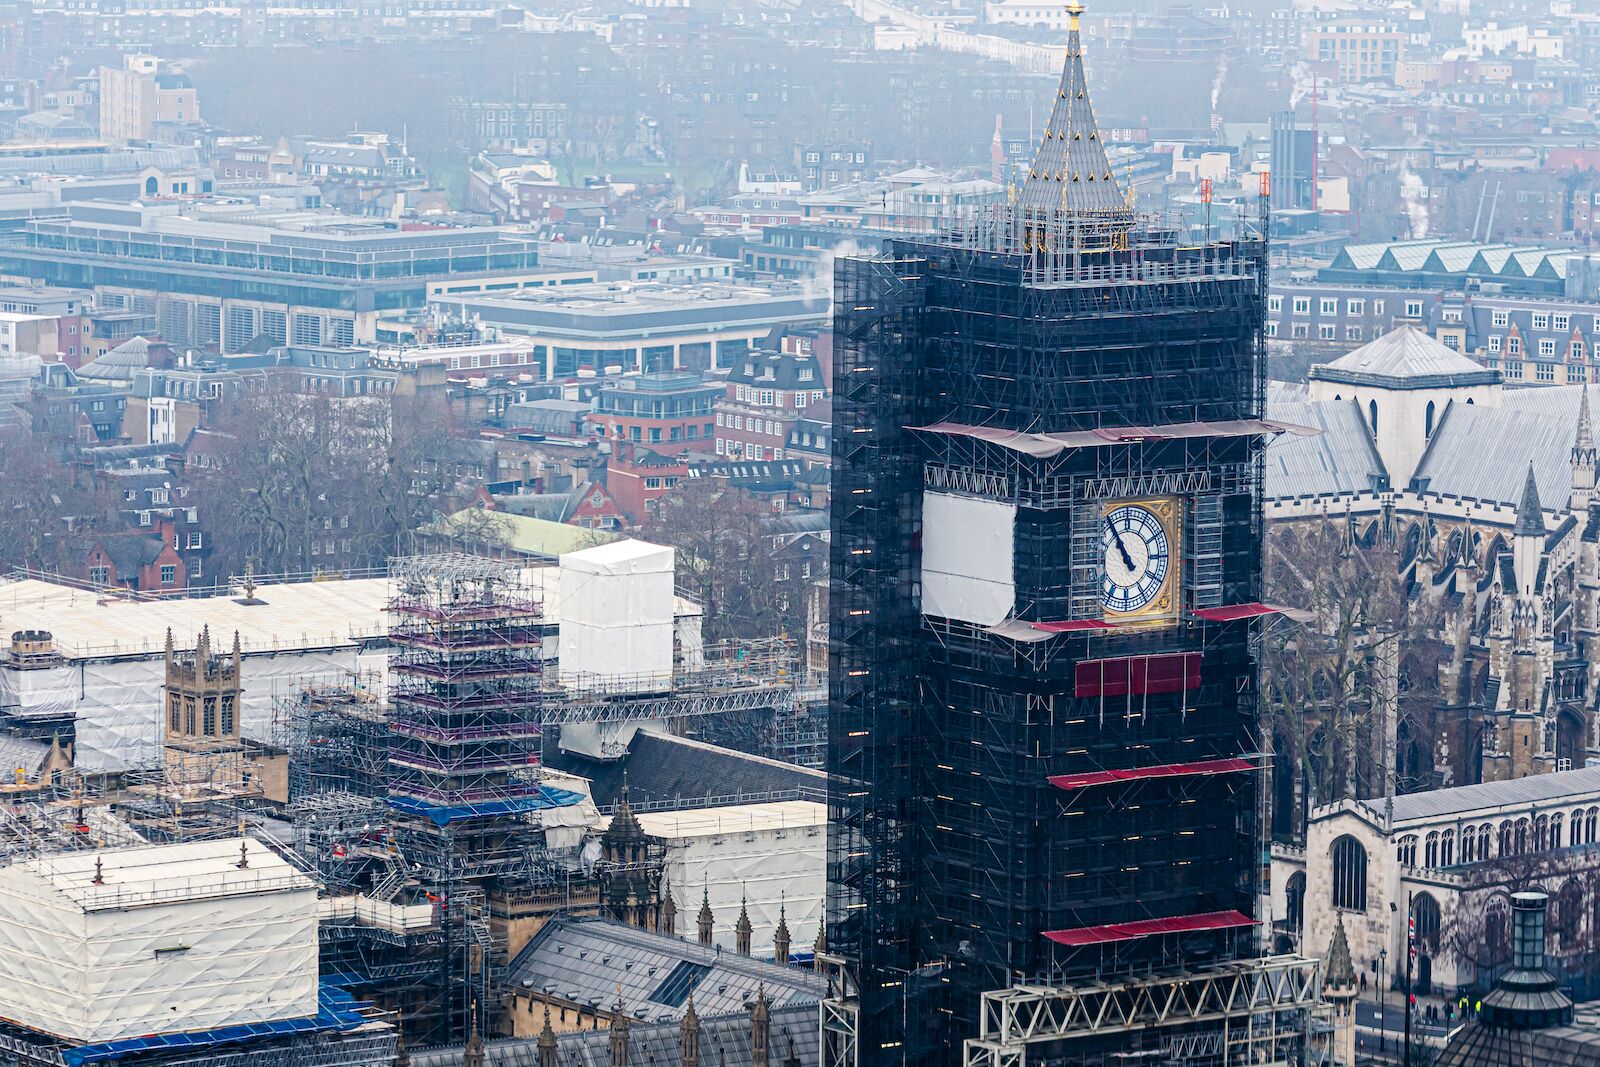 Big Ben covered in Scaffolding